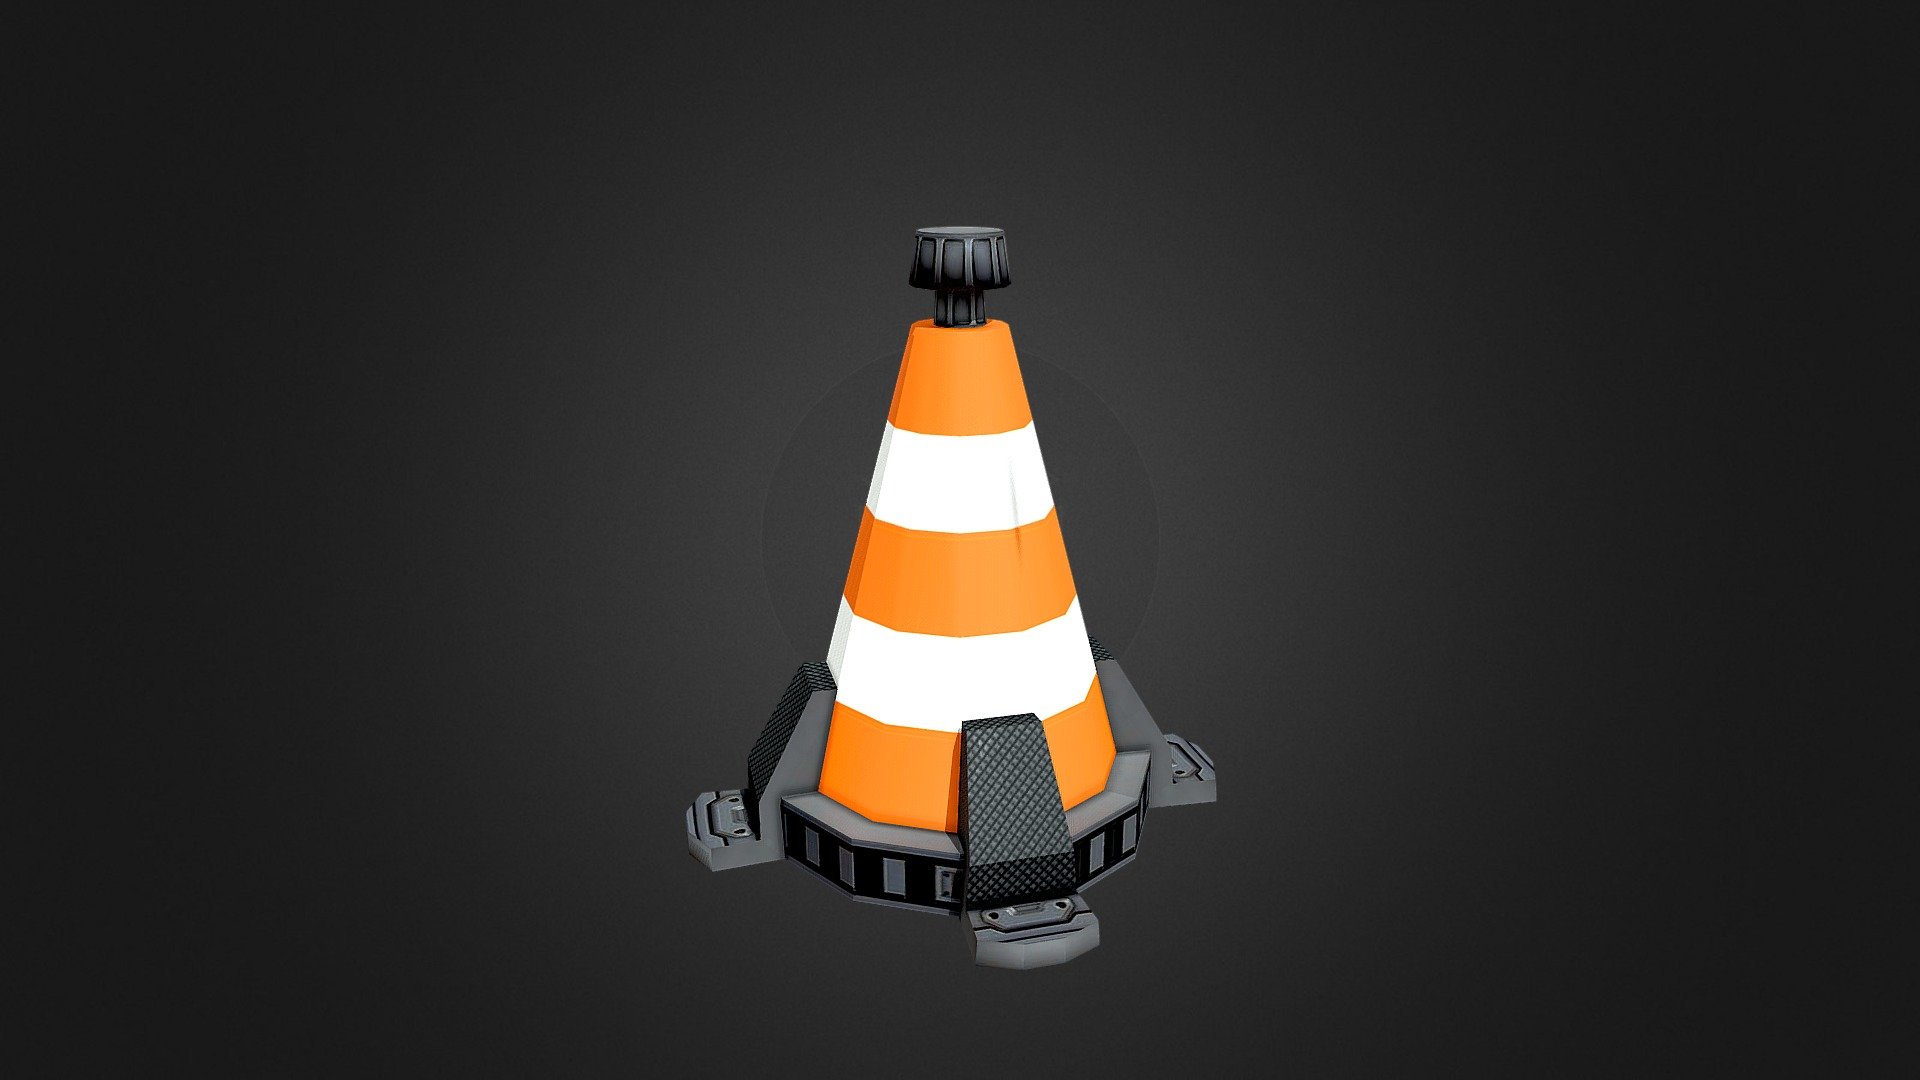 This Futuristic props that can easily be integrates into any futuristic animation/ game or environment. It makes your task easy as they are reusable and very simple to add and camouflage into your own creations as your own.

Package is low poly and very well optimized with ready to use Prefabs with collisions

Technical details:




Parking Cone : Vertices: 184 / Triangles: 298, 1 Atlast Texture
 - Futuristic Parking Cone - 3D model by Charles Smith (Blitz Mobile Apps) (@BlitzMobileApp) 3d model